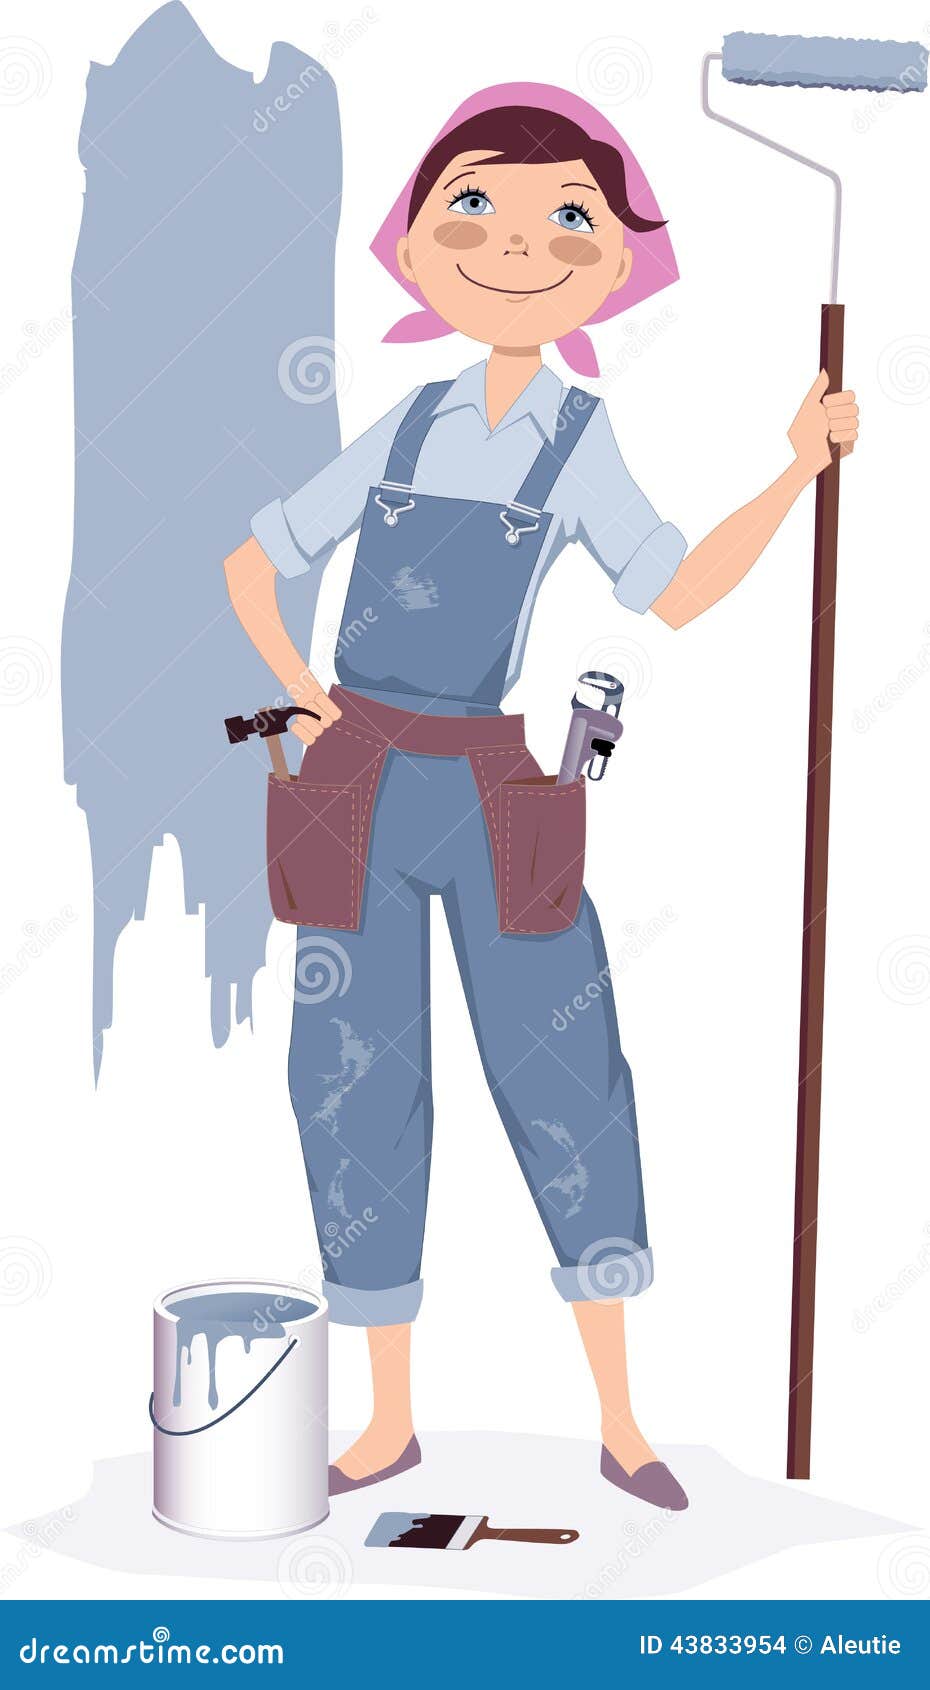 Painting a house stock vector. Illustration of handy - 43833954